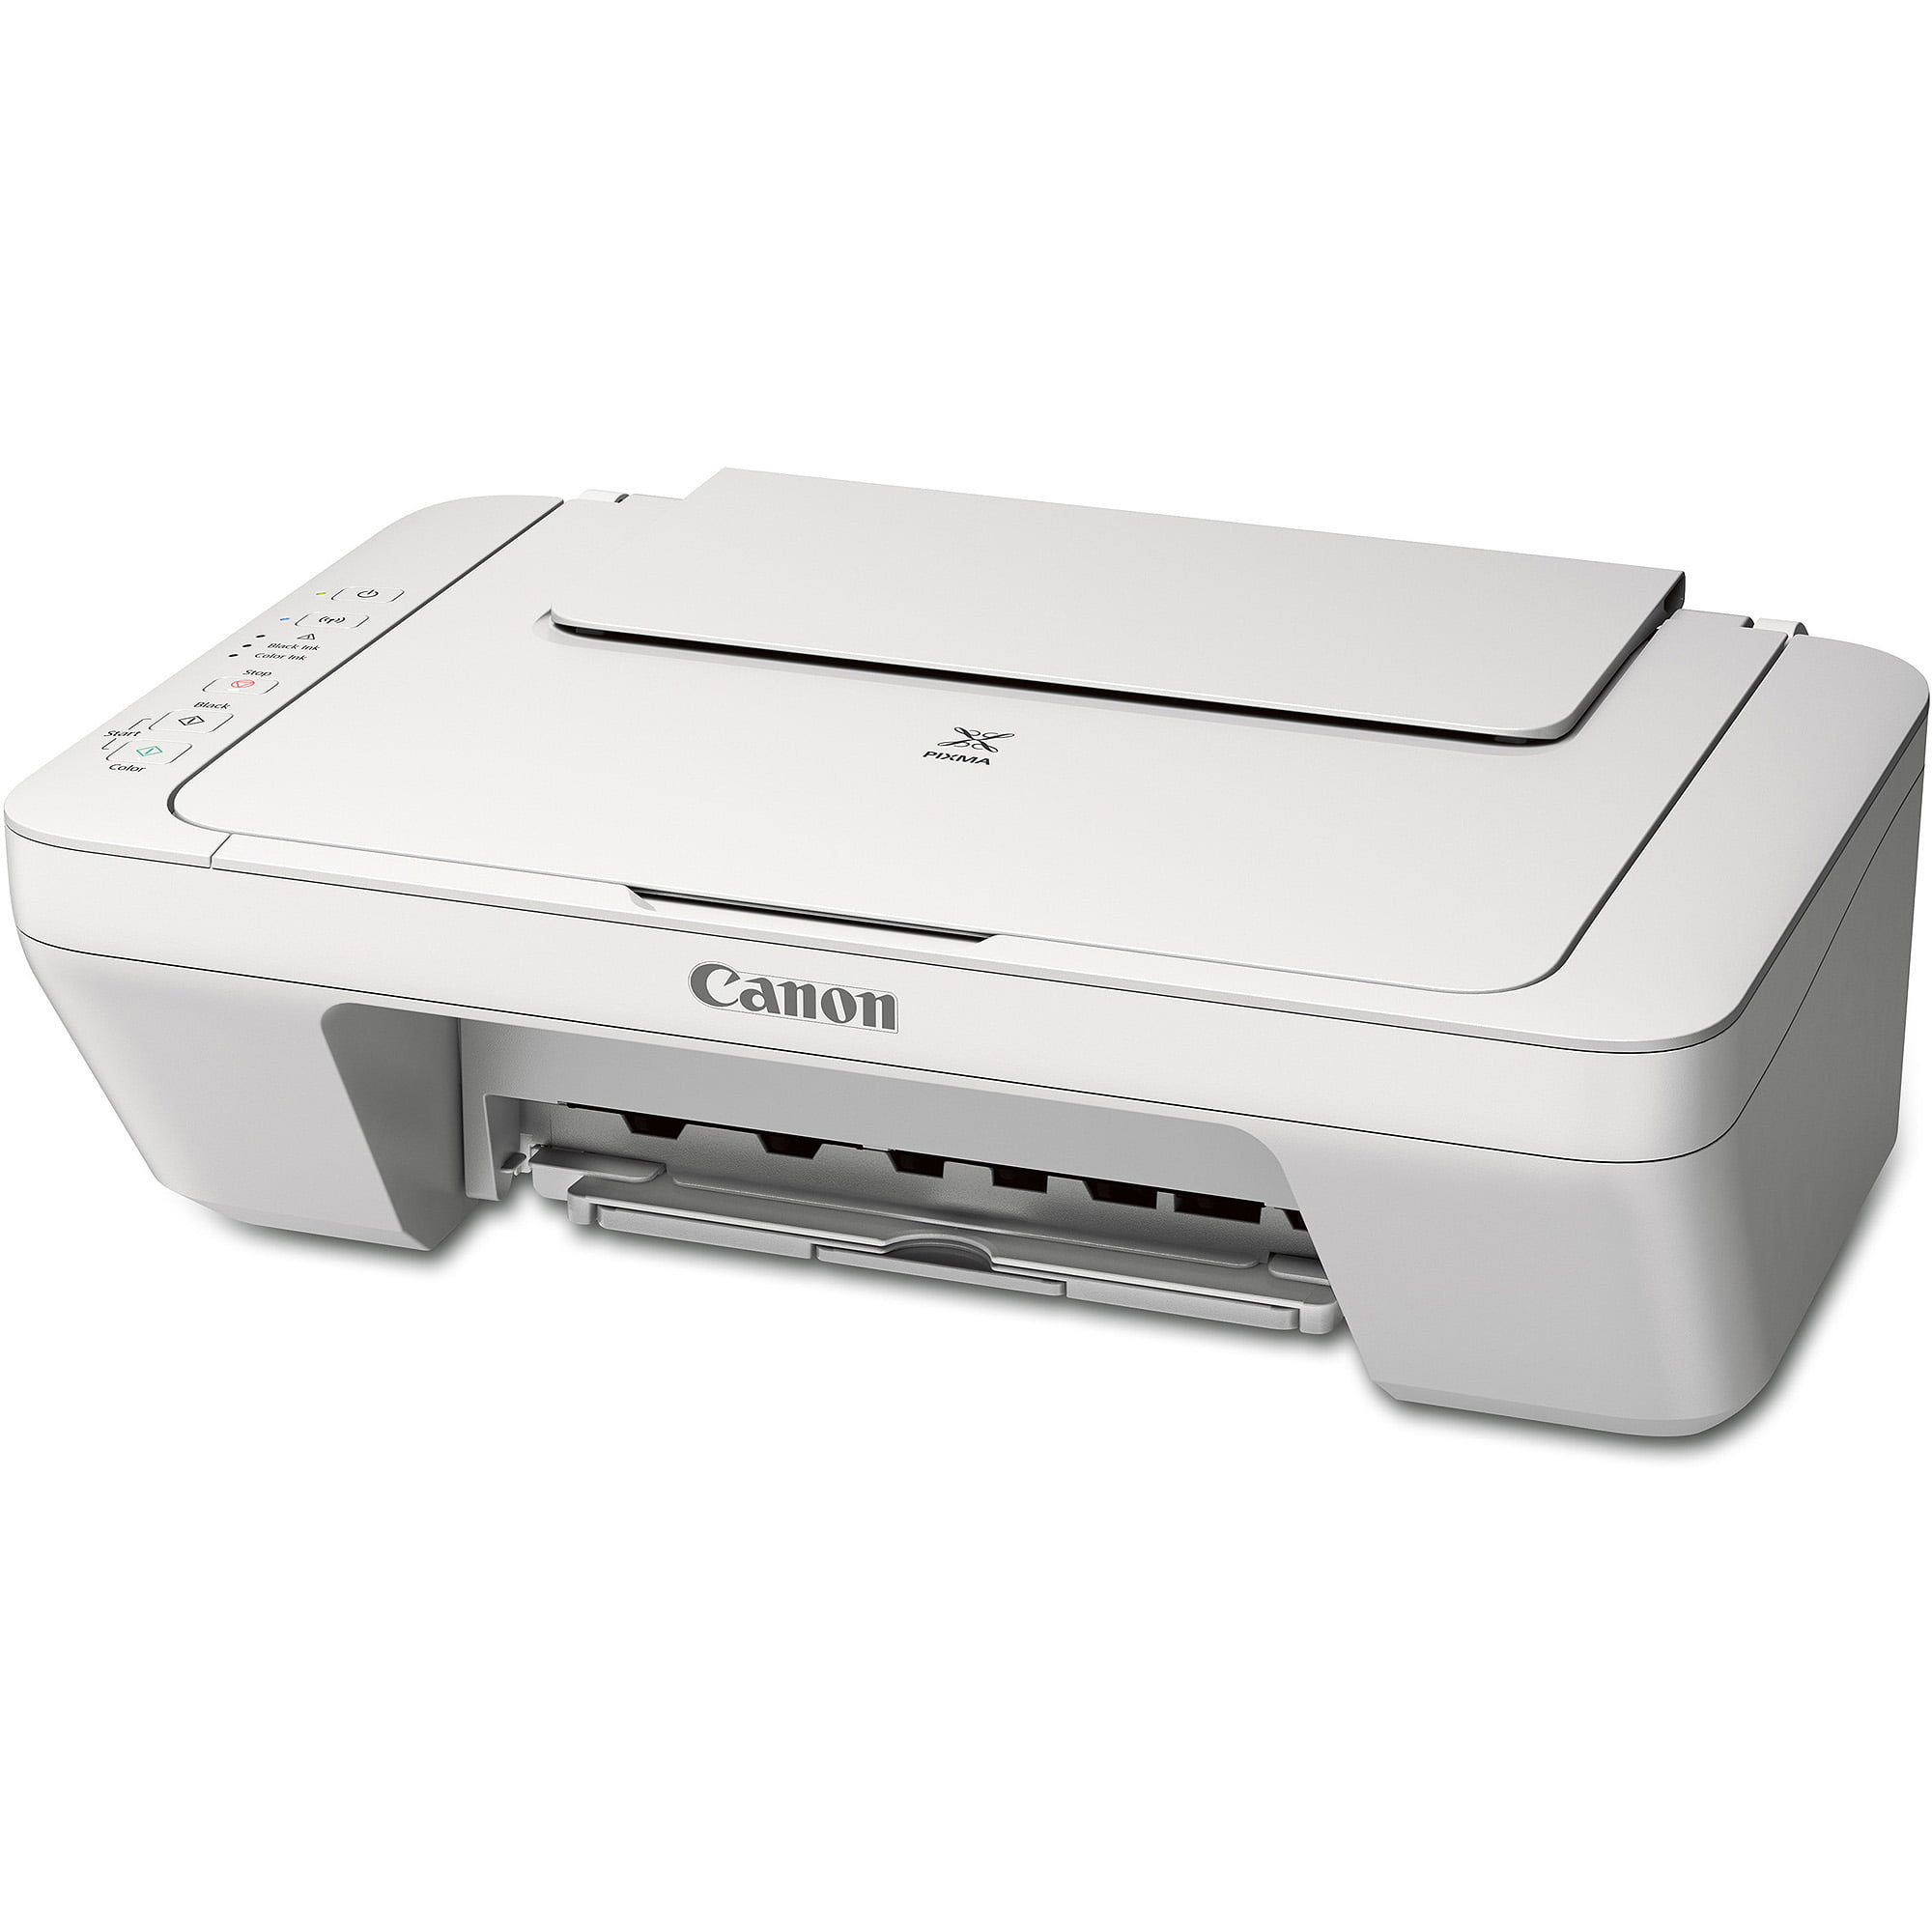 Does the Canon MG3220 printer come with a manual?